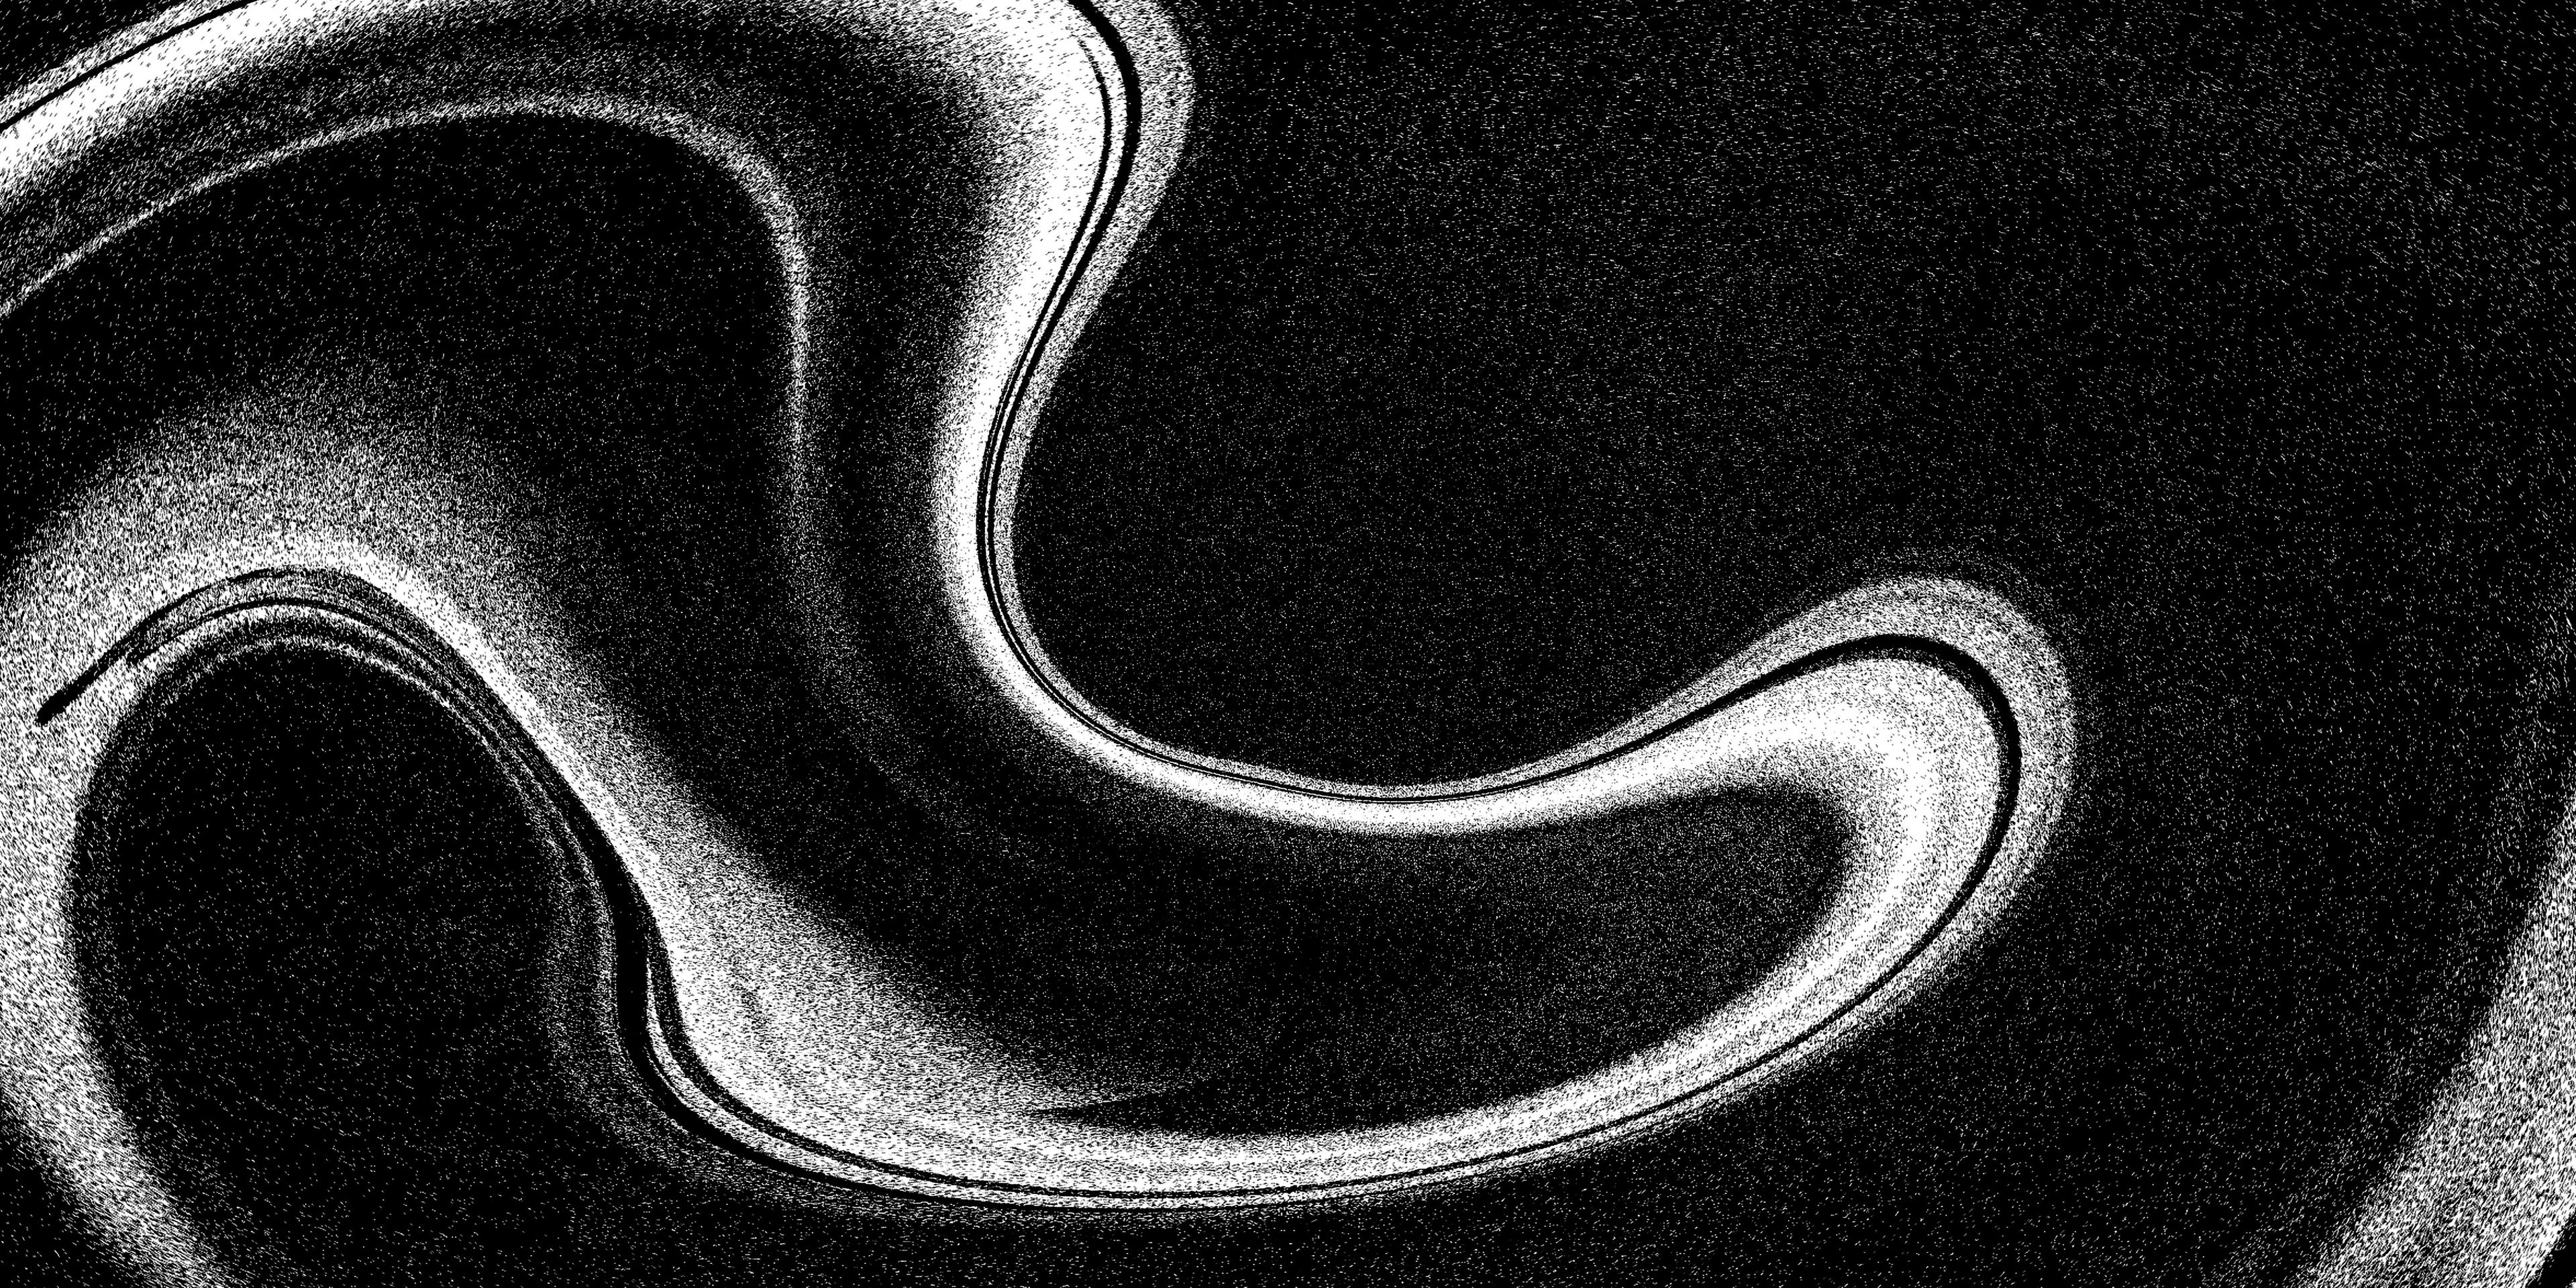 A black and white image of a swirl on a black background .